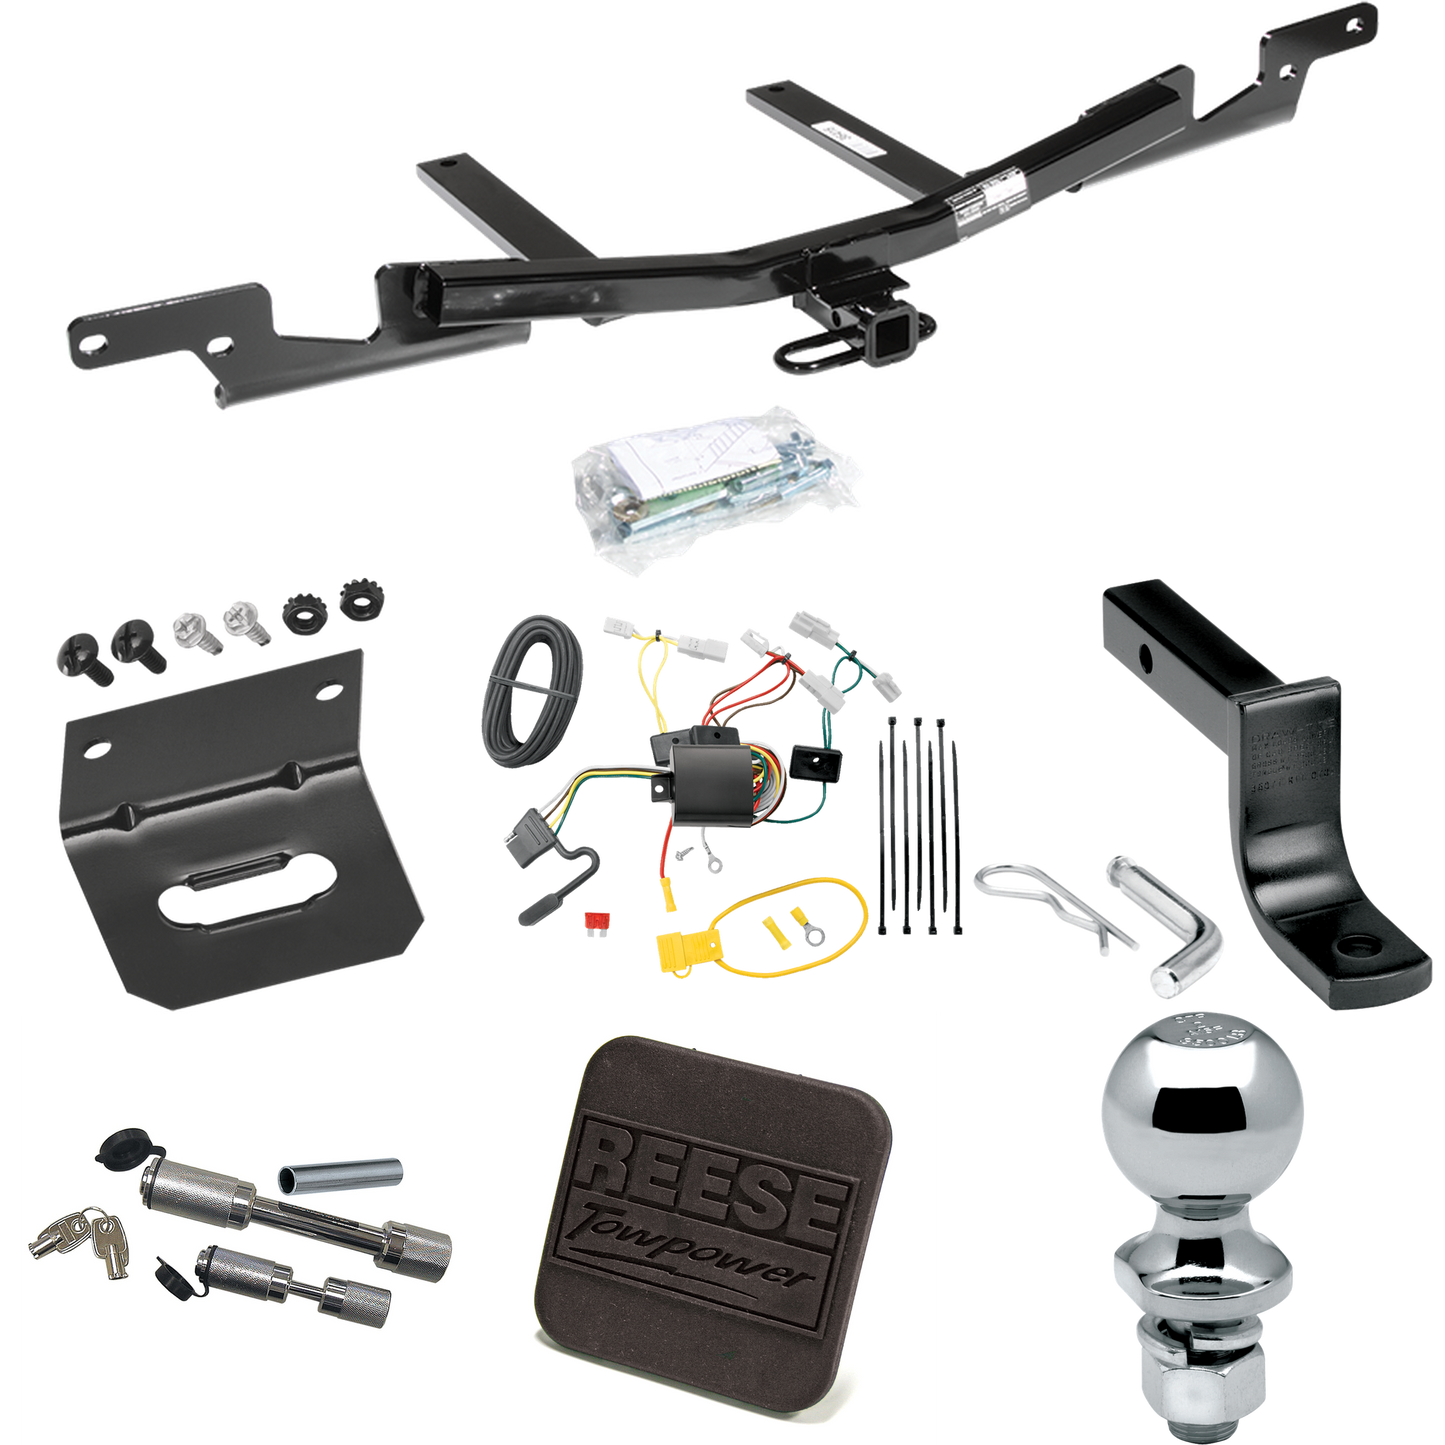 Fits 2007-2009 Toyota Camry Trailer Hitch Tow PKG w/ 4-Flat Wiring Harness + Draw-Bar + 2" Ball + Wiring Bracket + Hitch Cover + Dual Hitch & Coupler Locks (For Sedan, Except Hybrid Models) By Reese Towpower